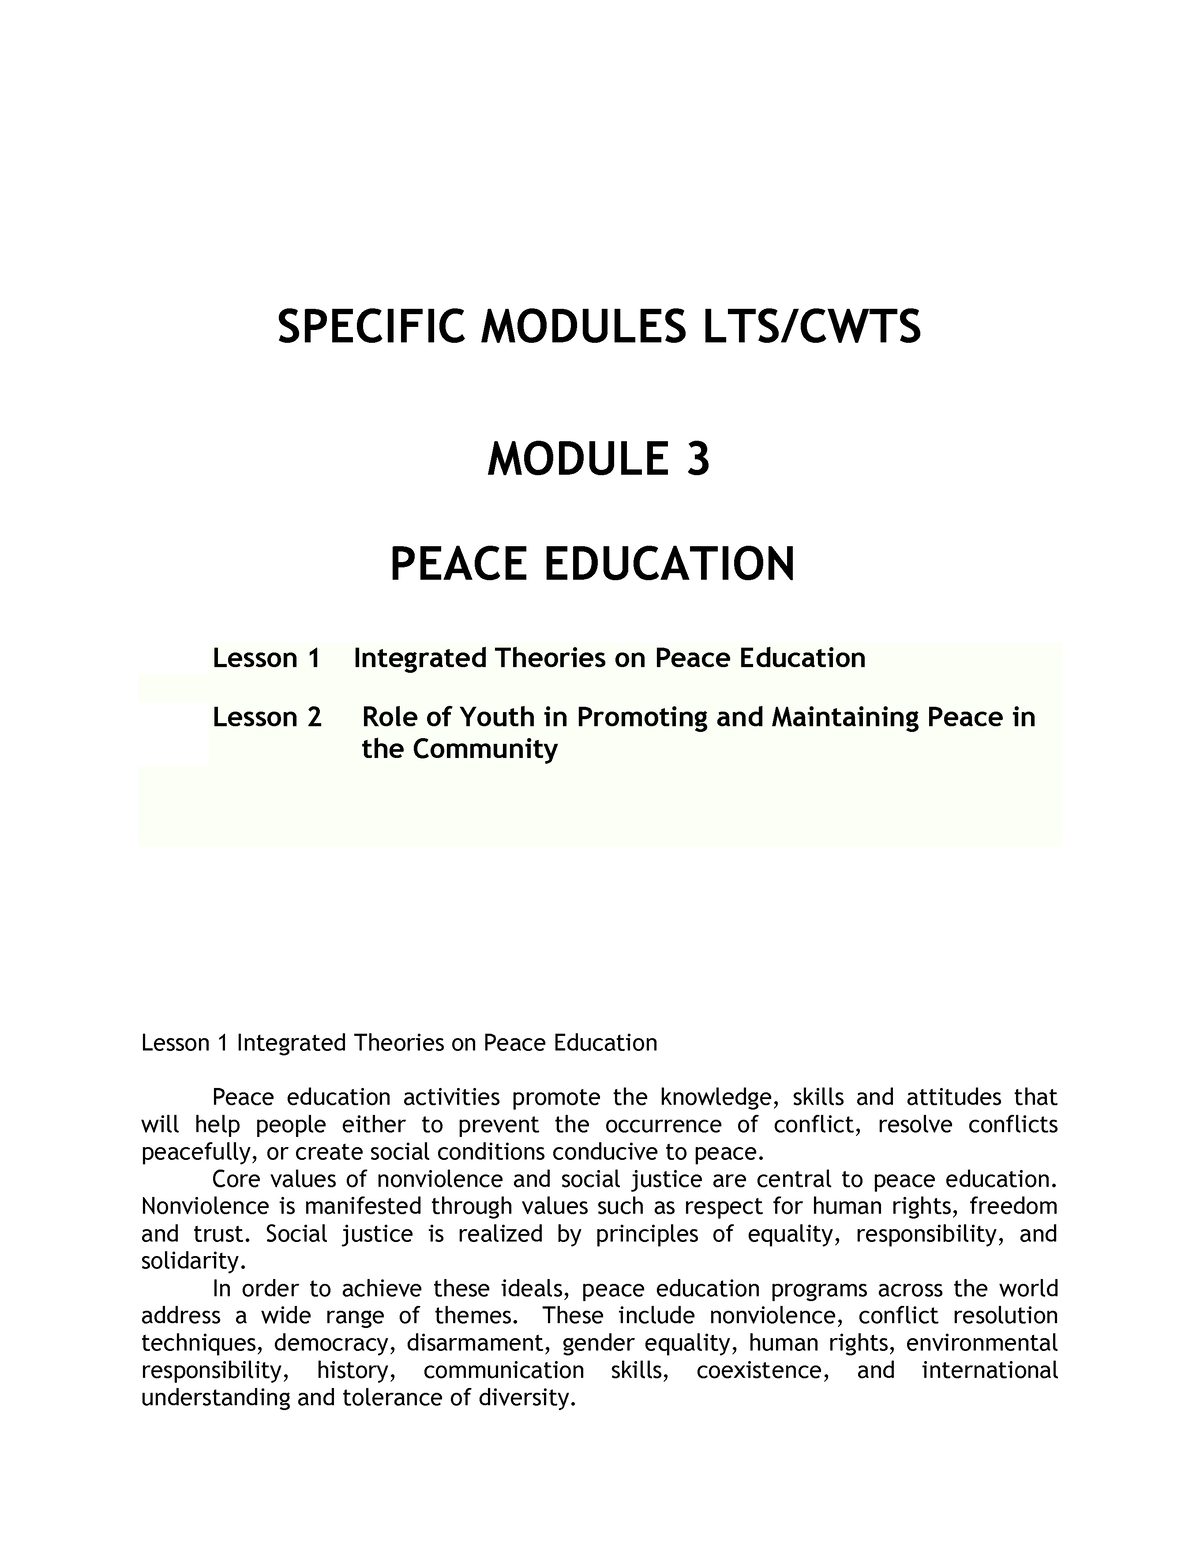 peace education journal article